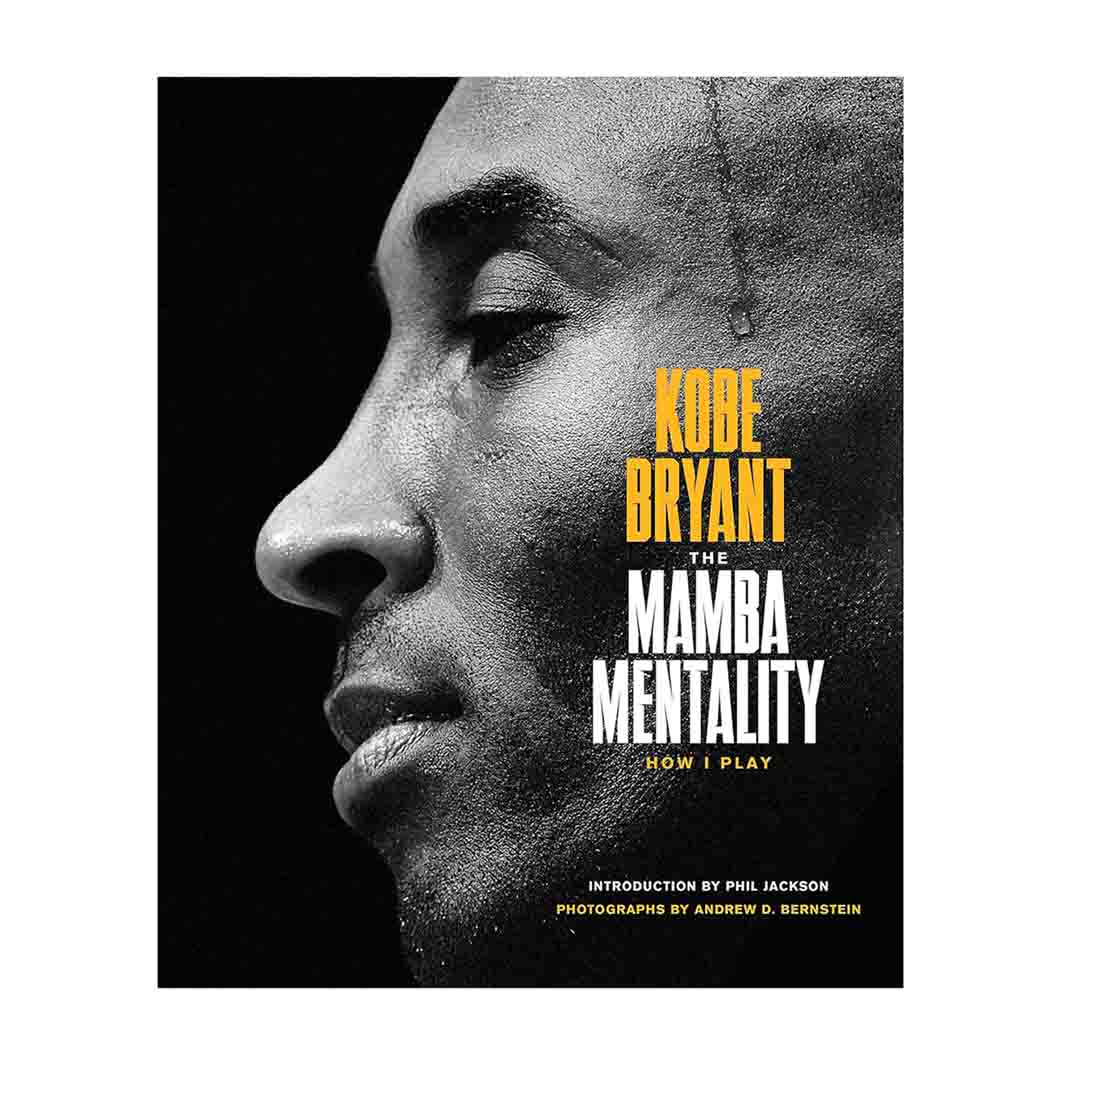 book titled The Mamba Mentality: How I Play with a picture of Kobe Byrant